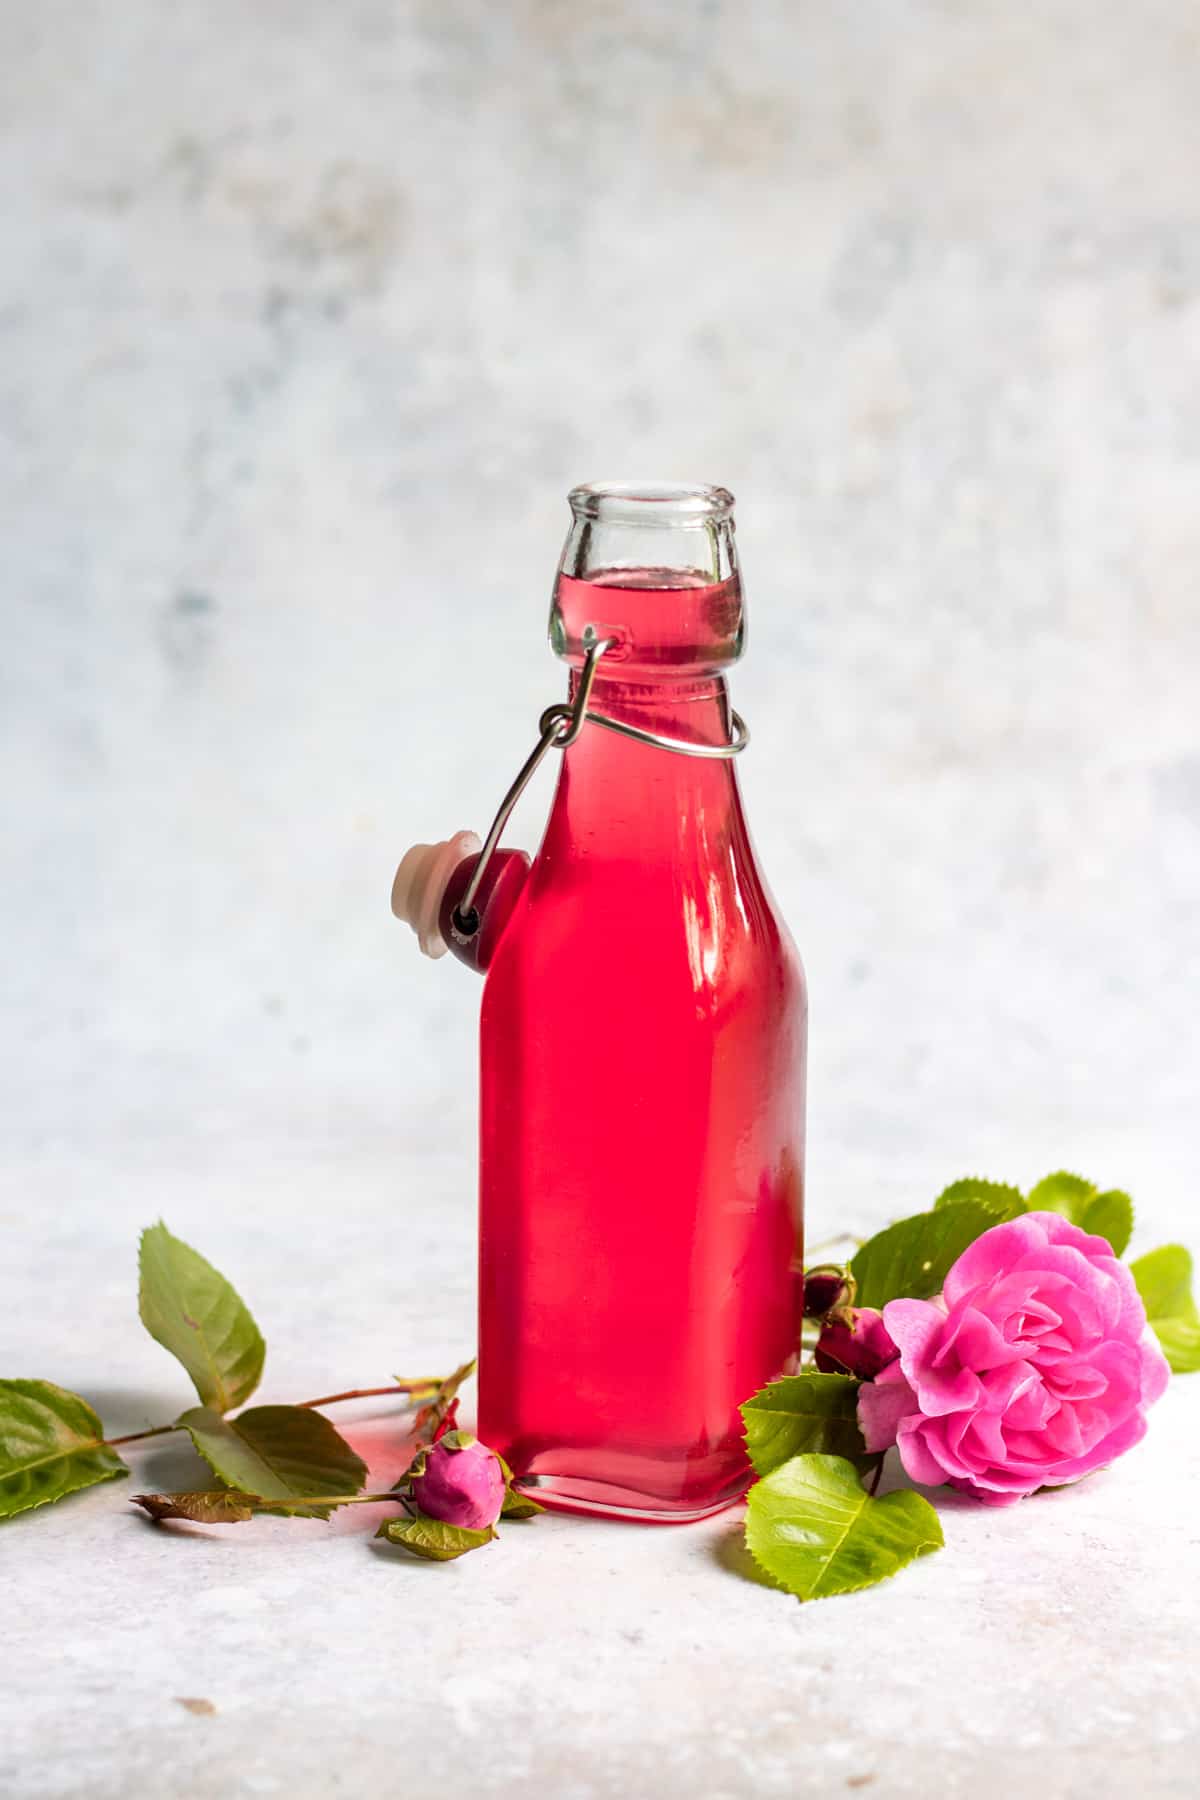 Syrup in a bottle next to some roses.